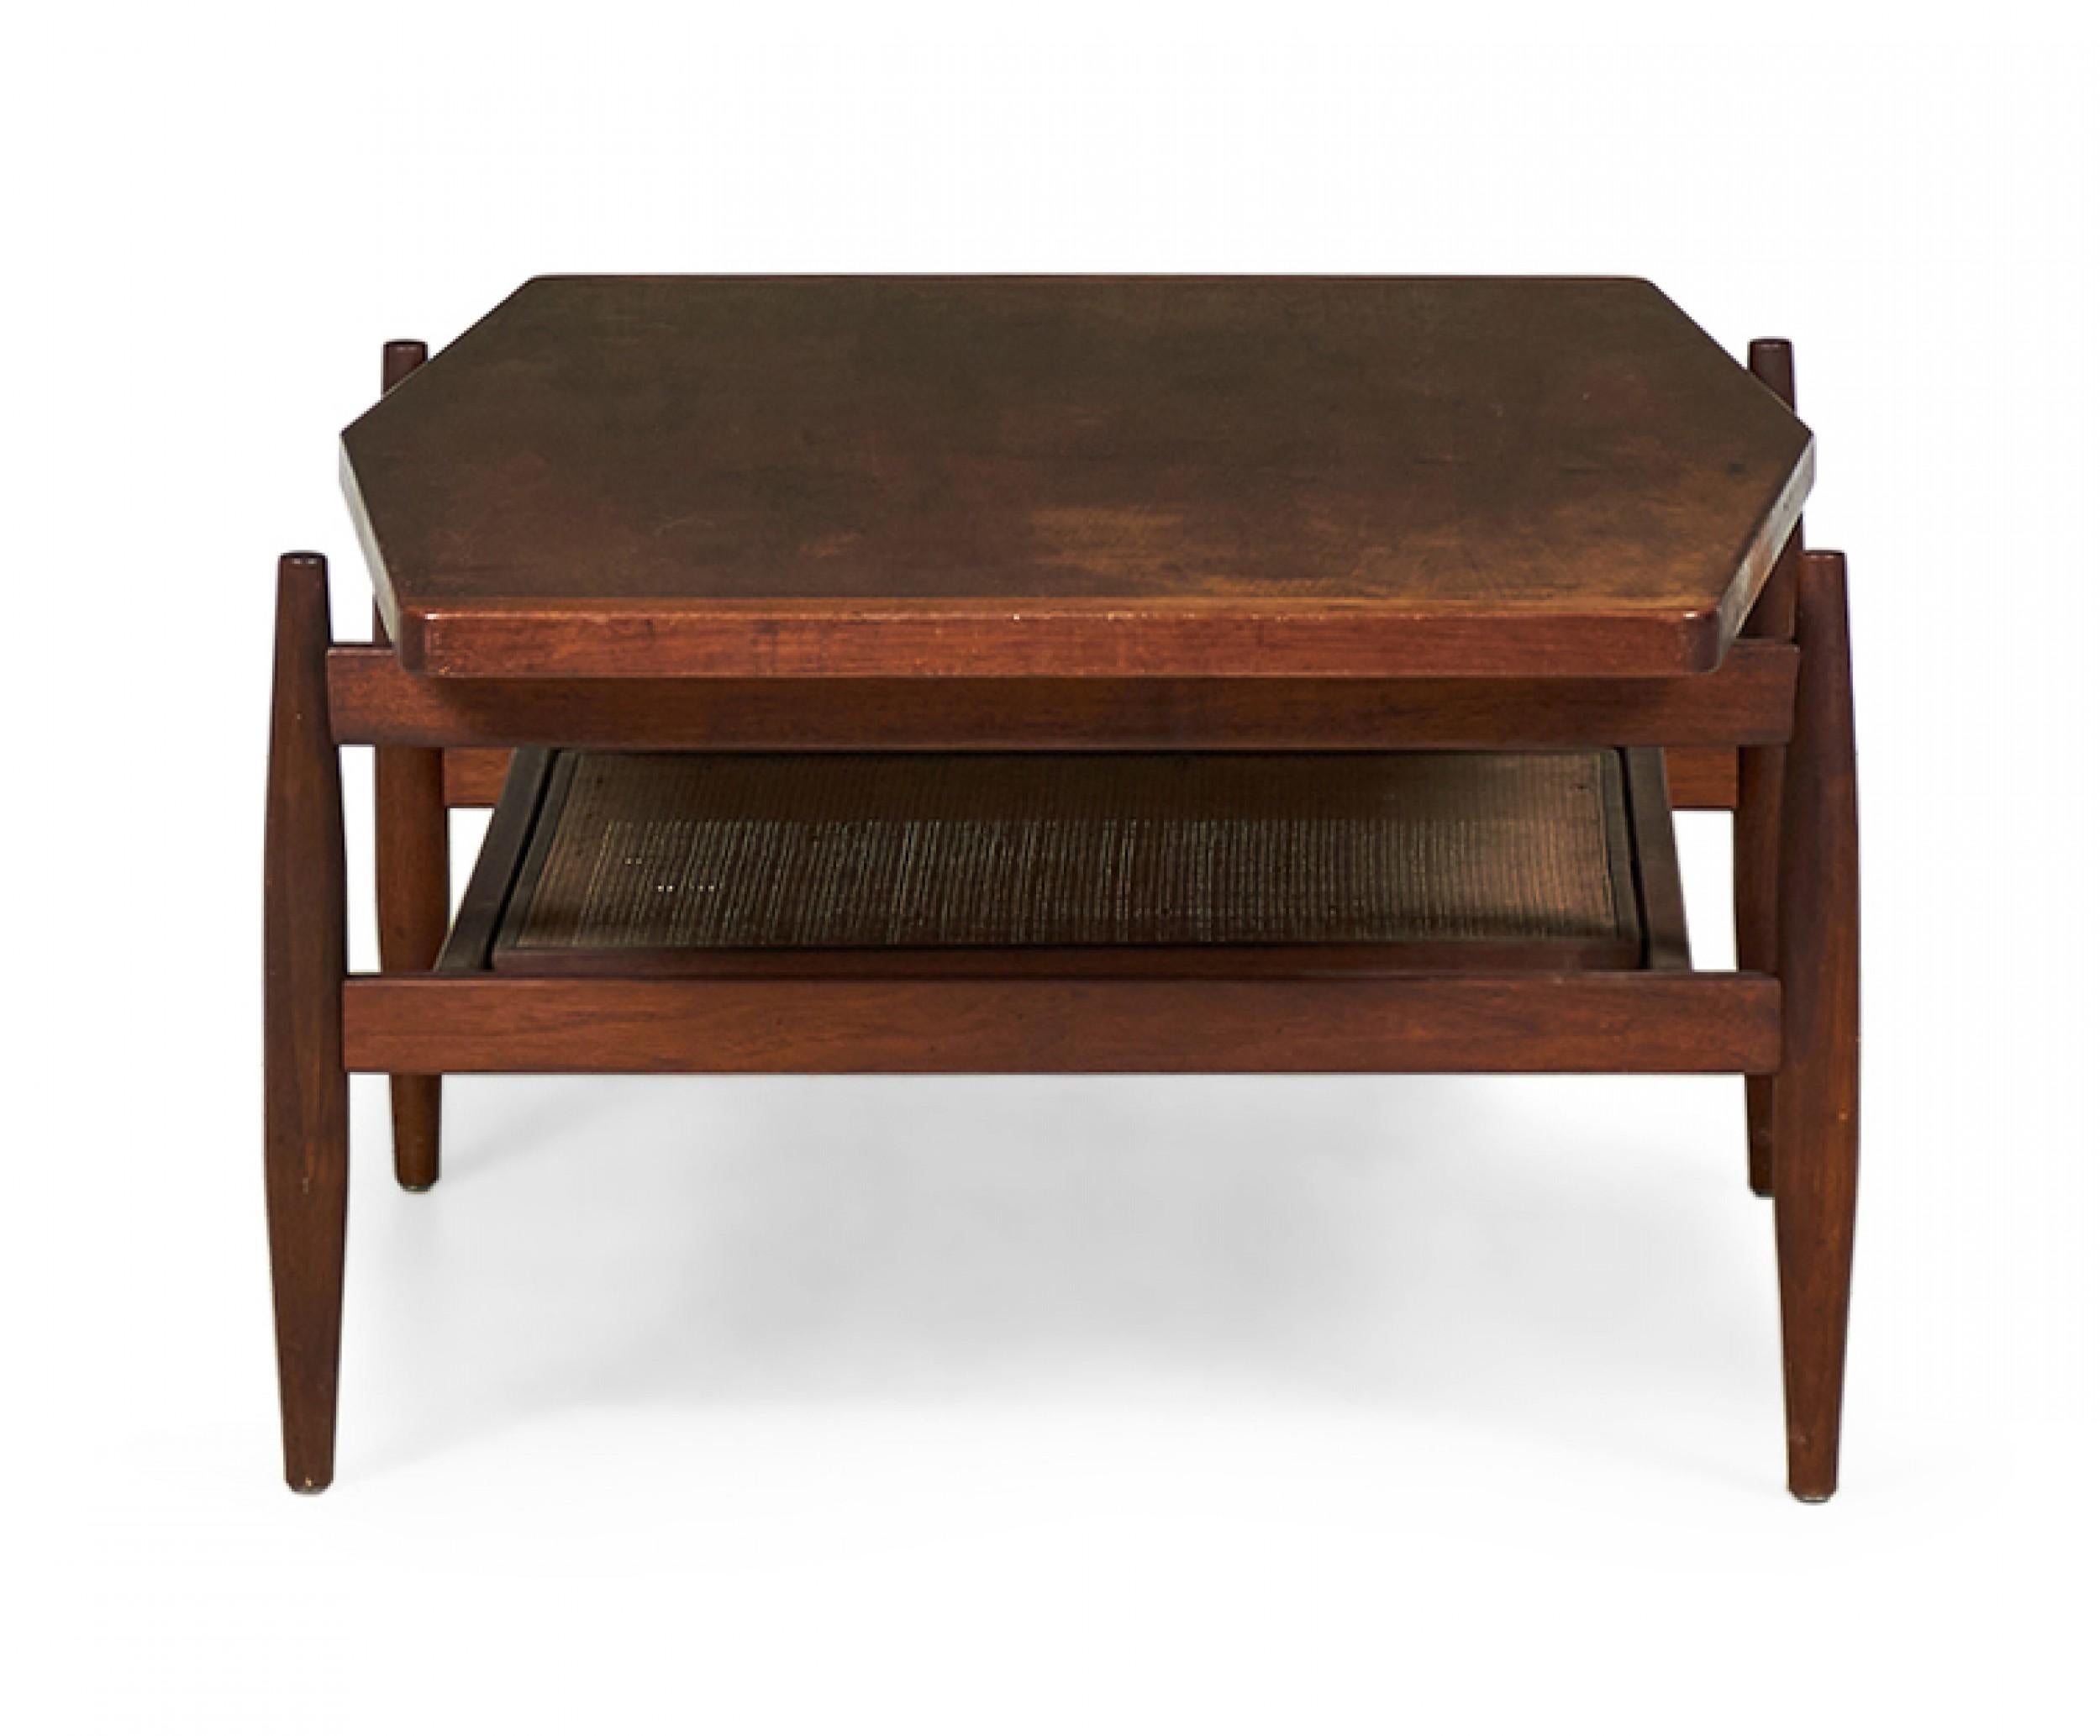 American/Danish Mid-Century walnut coffee table with a gently diamond-shaped top resting on a structured stretcher base with four tapered legs and stretcher shelf with caned inset. (JENS RISOM)(Similar tables: DUF0091B, DUF0091C)
